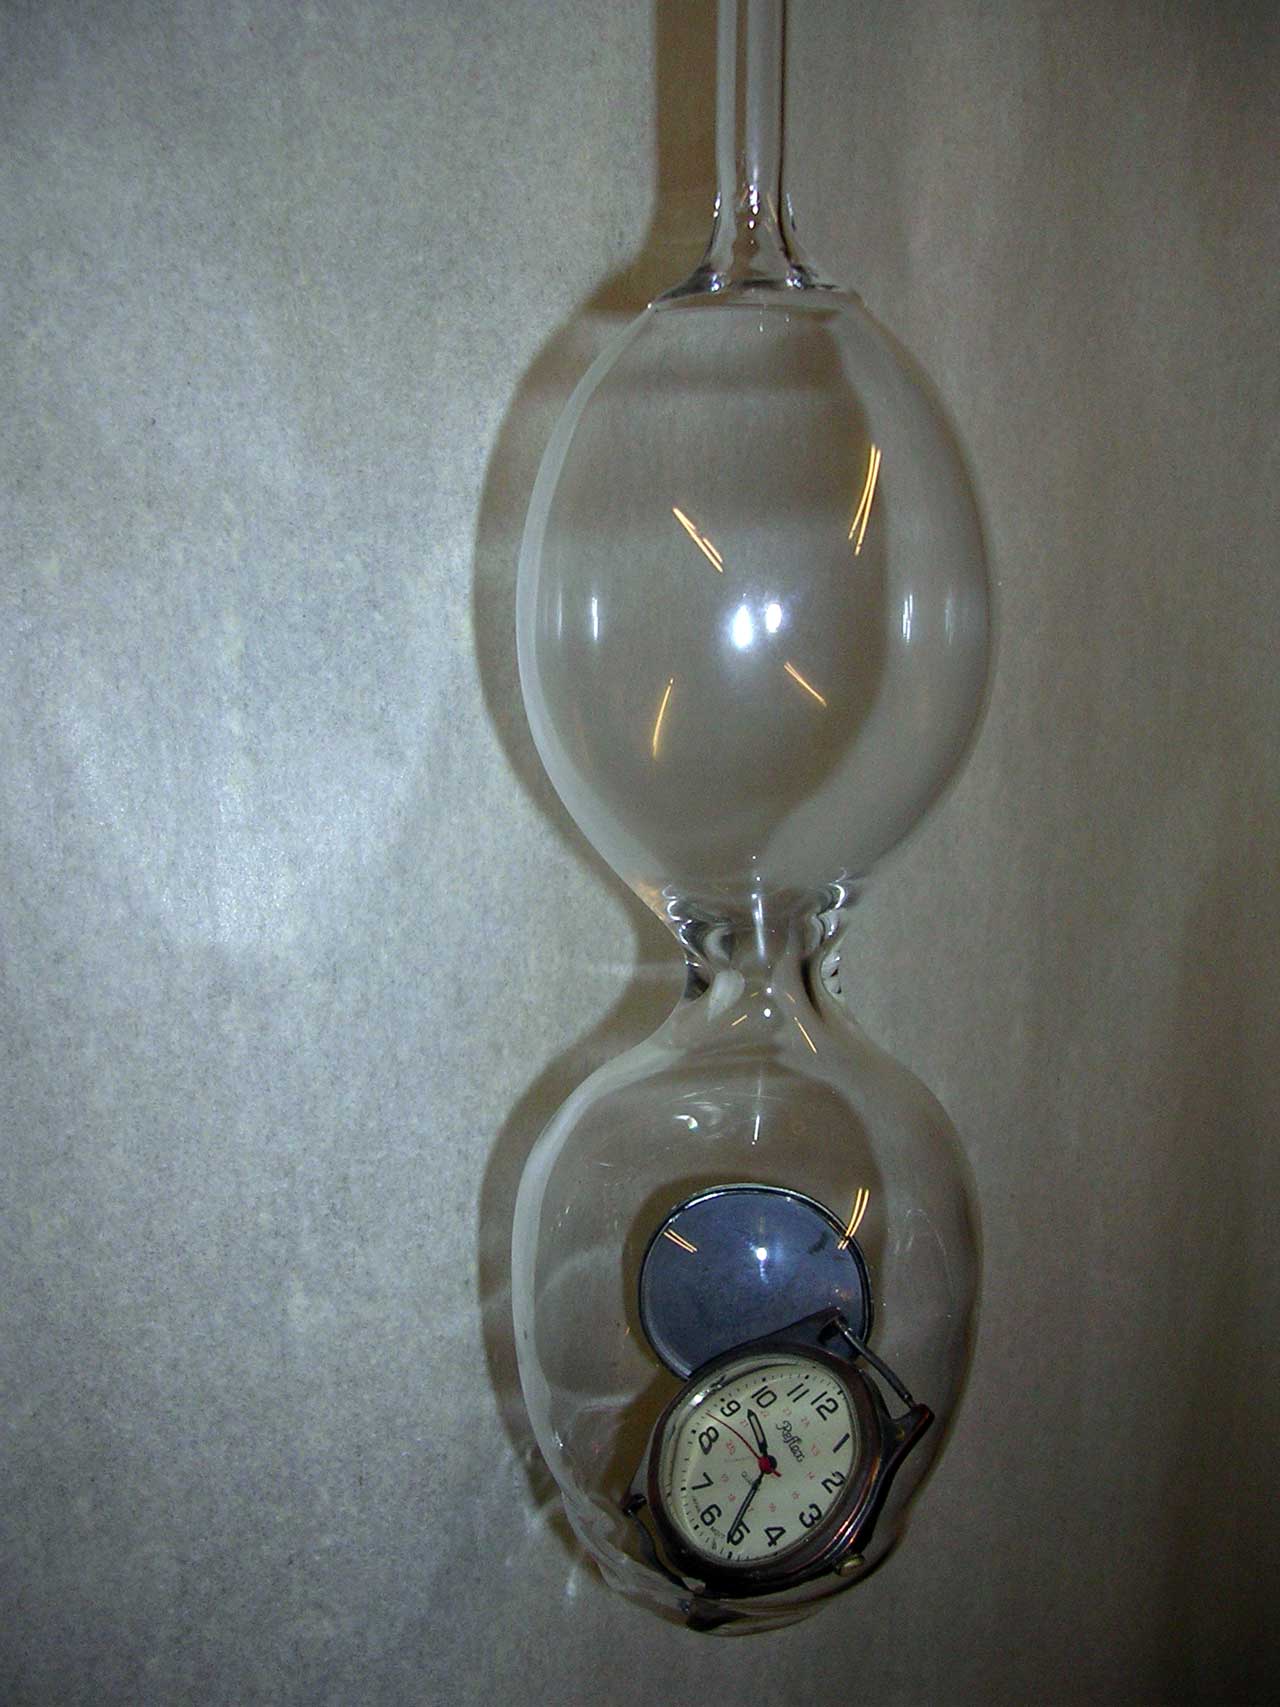 Photo: Egg Timer Close by Ian Pearson